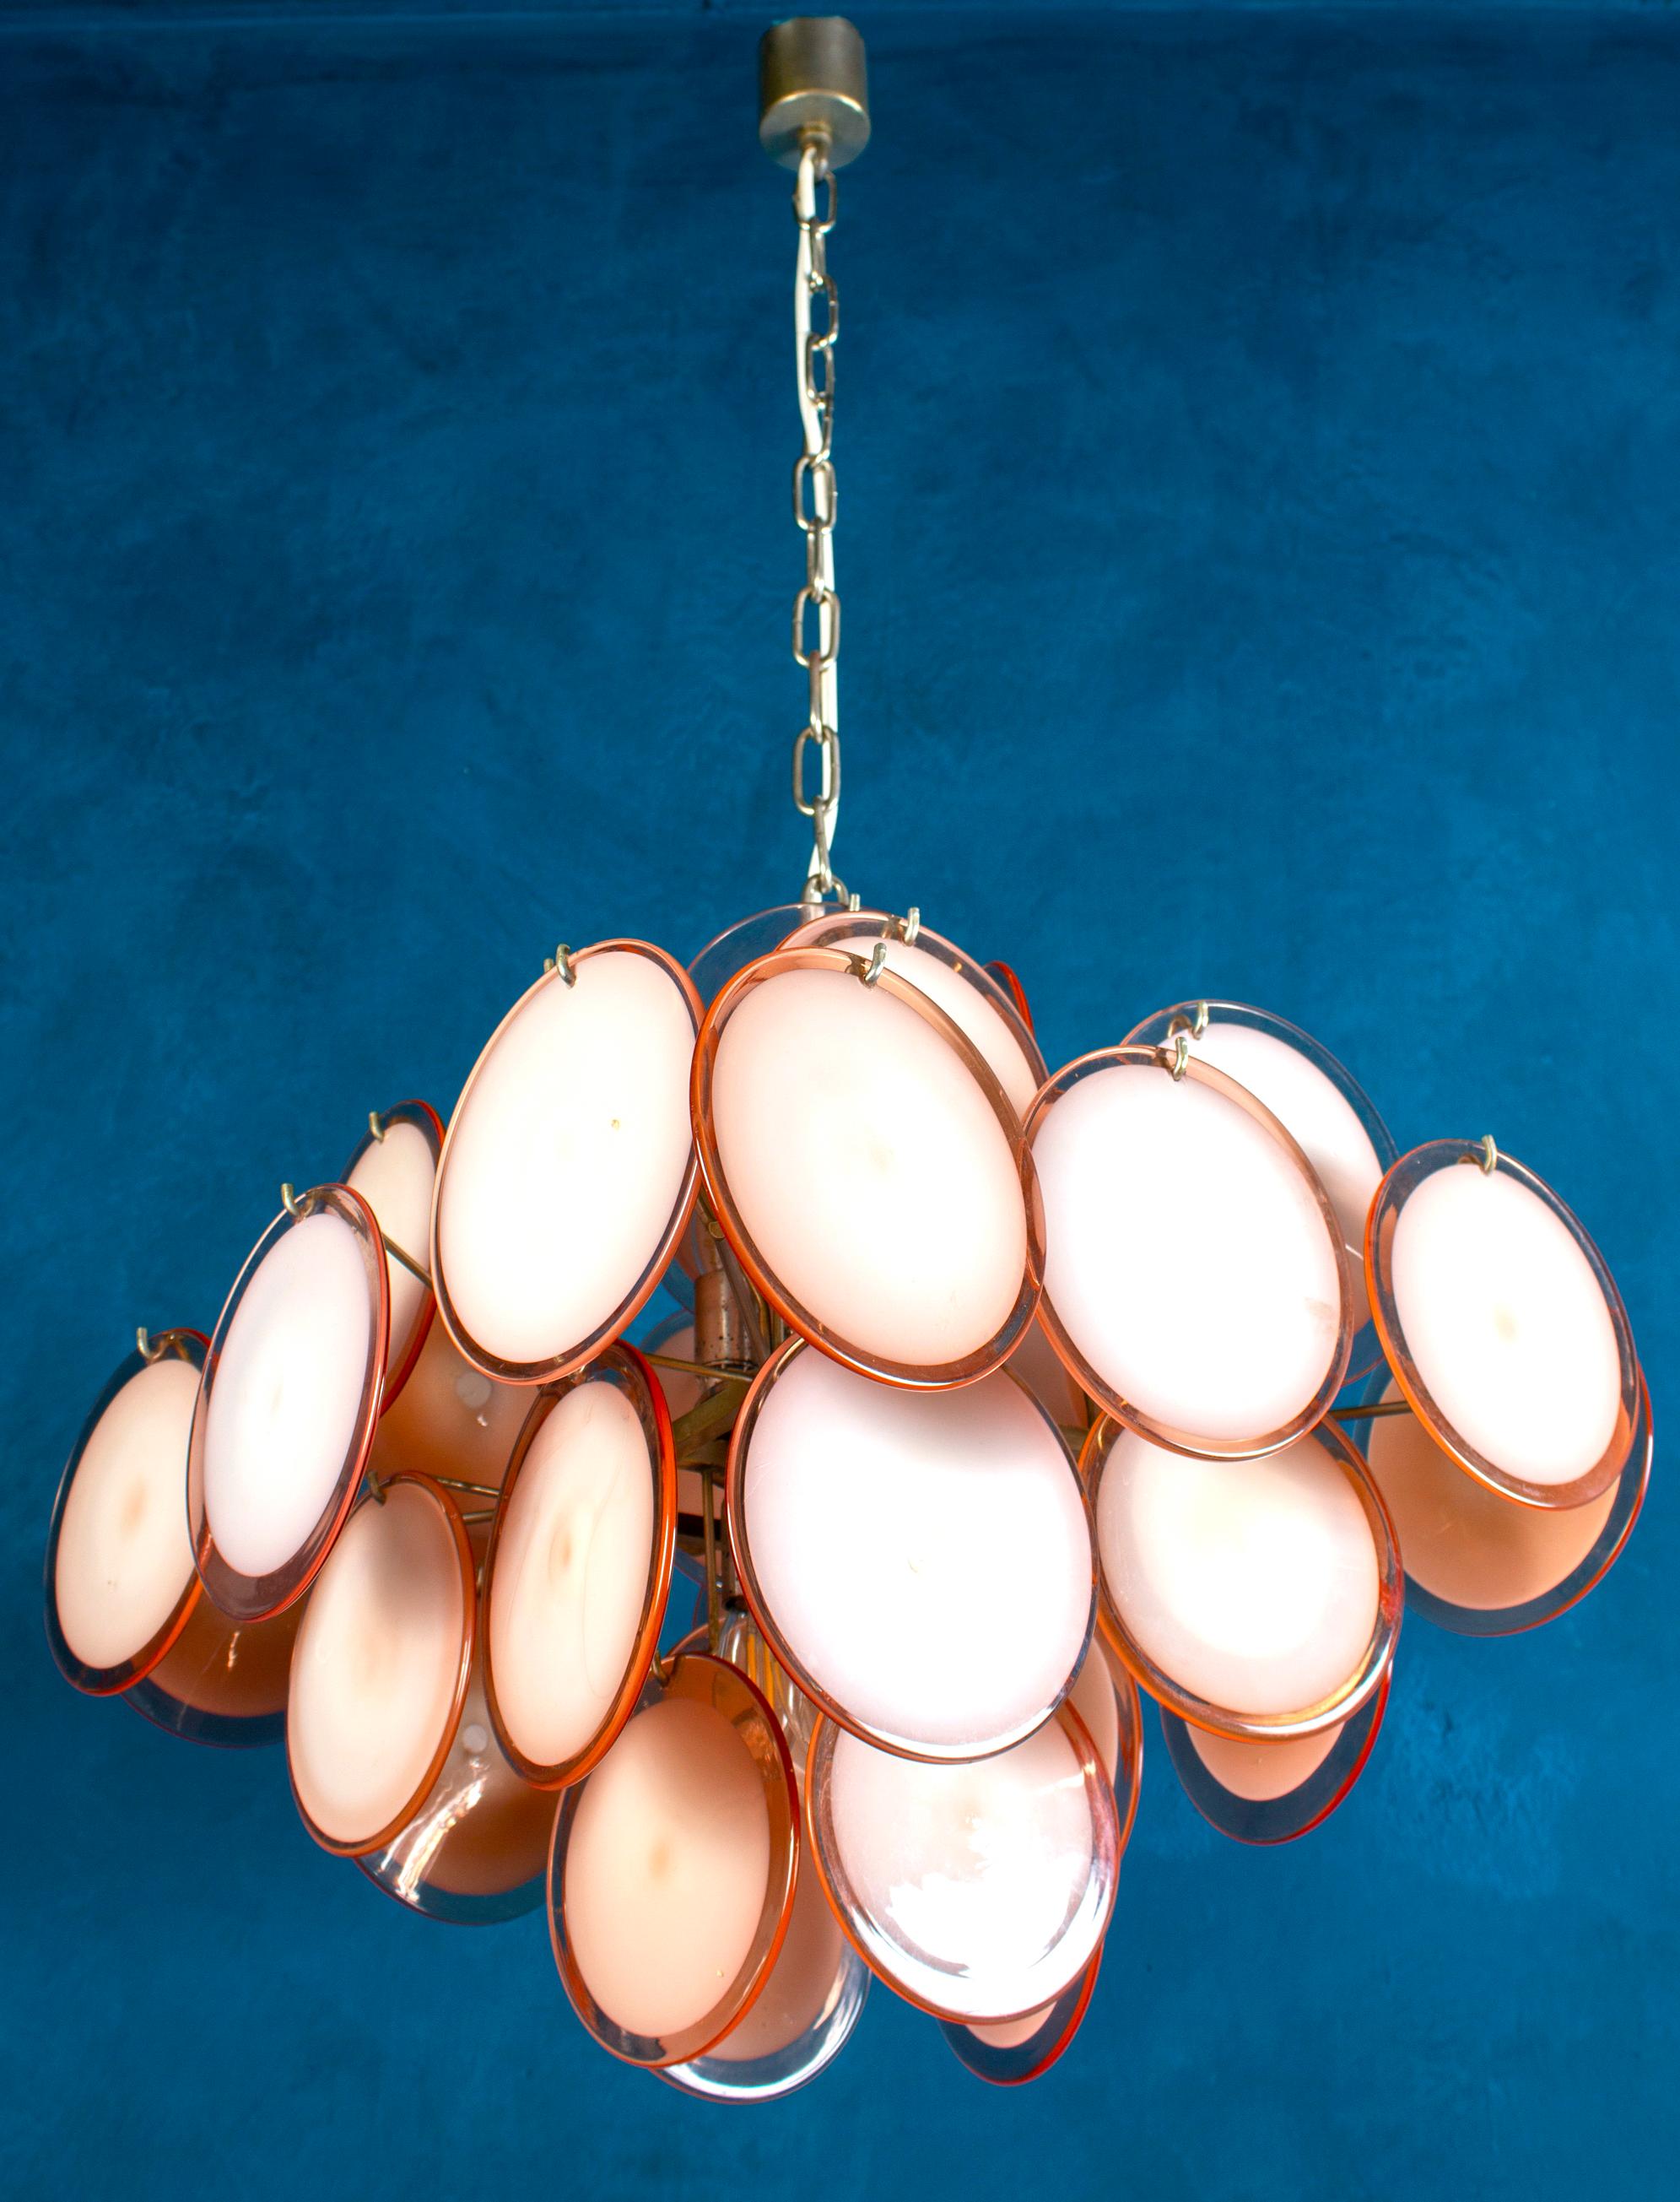 Murano Disc Chandelier Attributed to Vistosi, 1970s For Sale 1